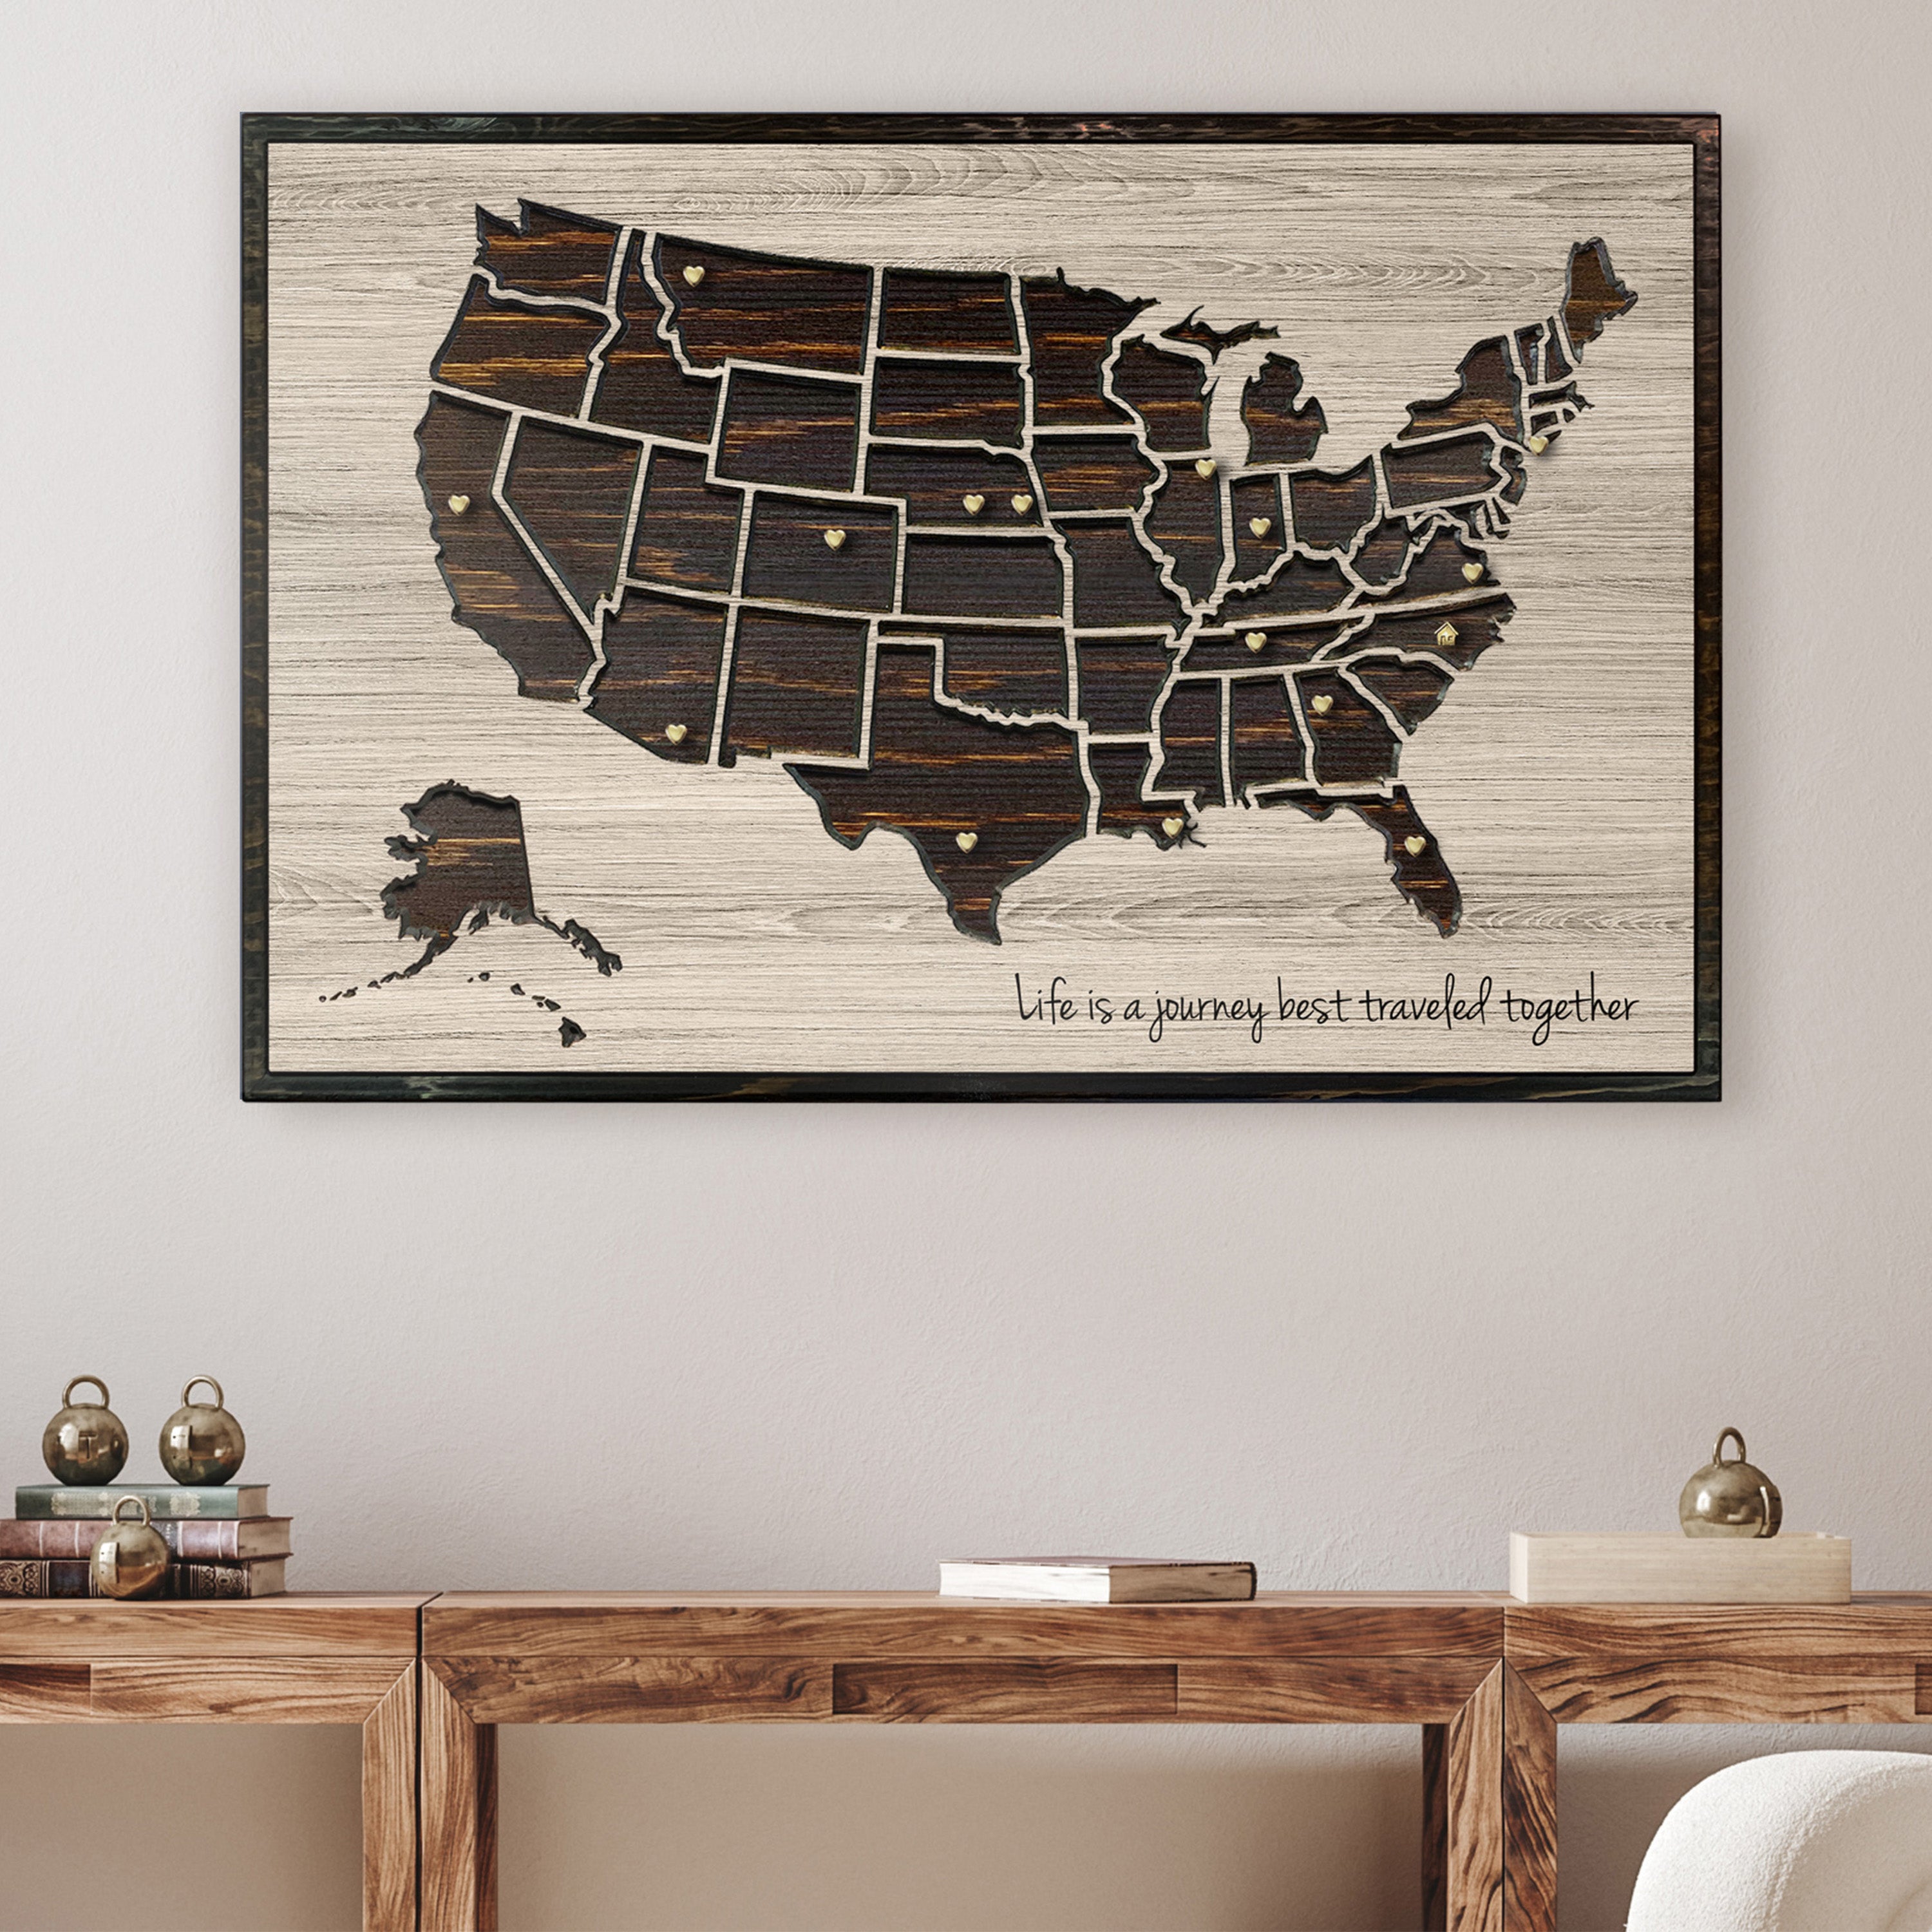 Large Wall Map of the World, Wooden World Map to Mark Travels, Push Pin Map  of the World, Bedroom Wall Decor 